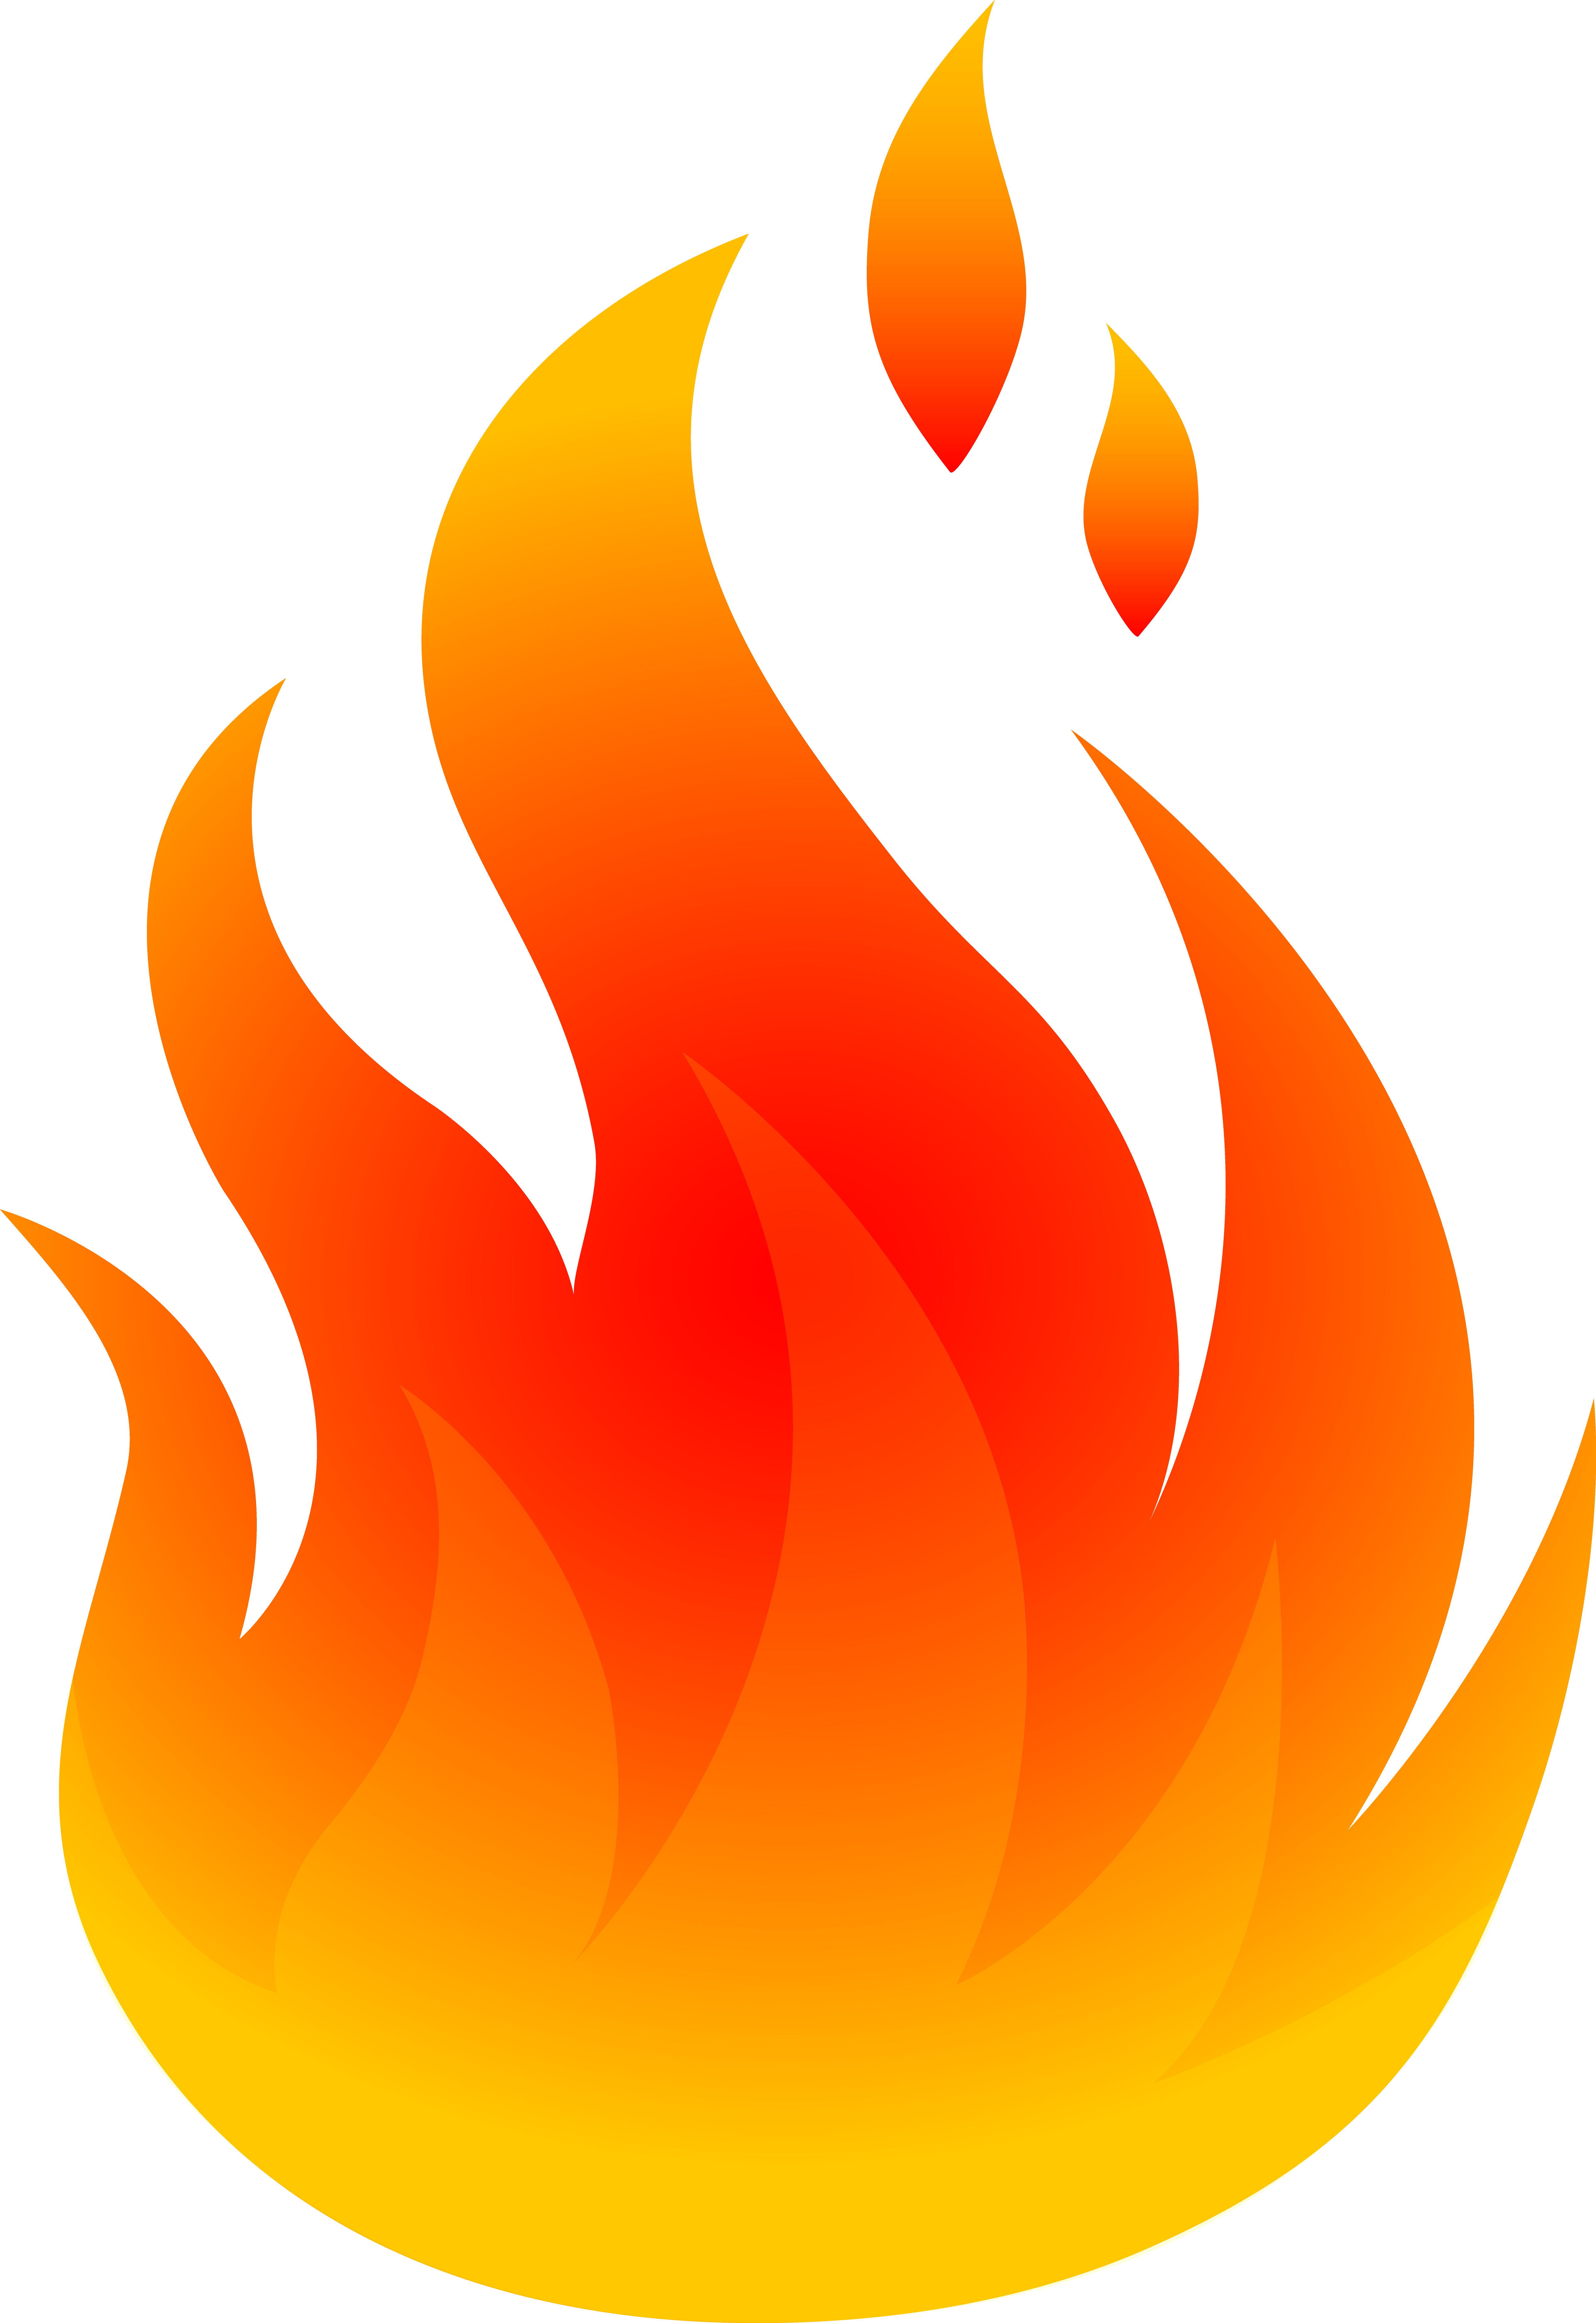 Clipart flames realistic fire flame. This pin describes an